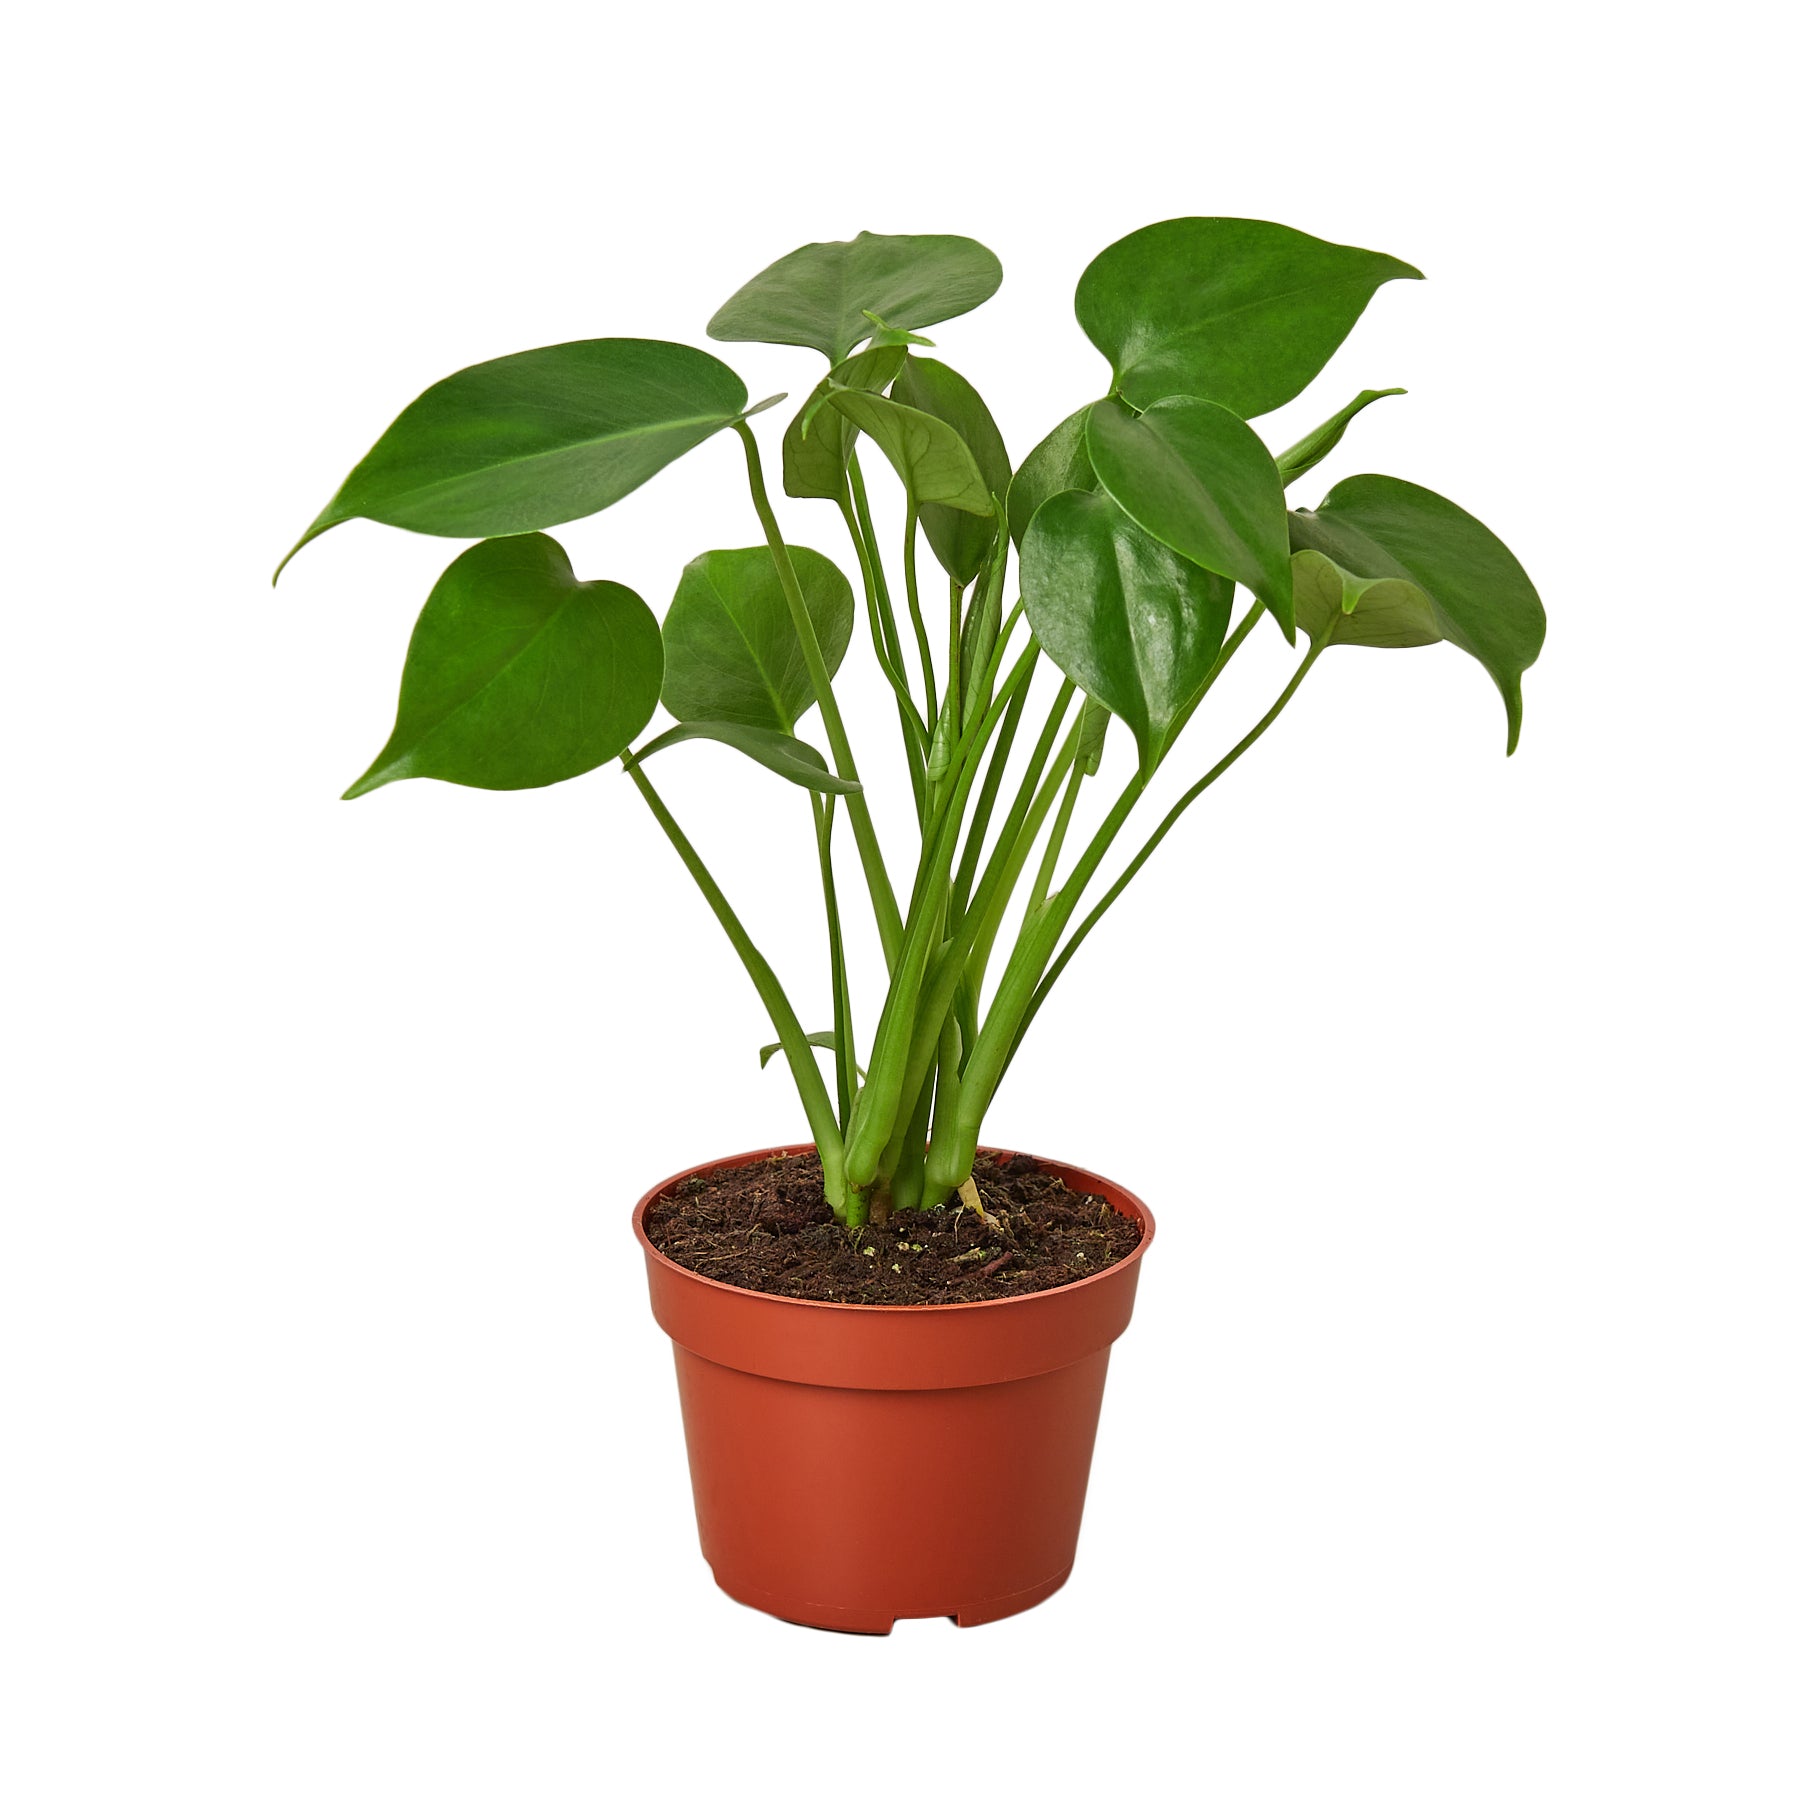 A plant in a pot on a white background at a nursery near me.